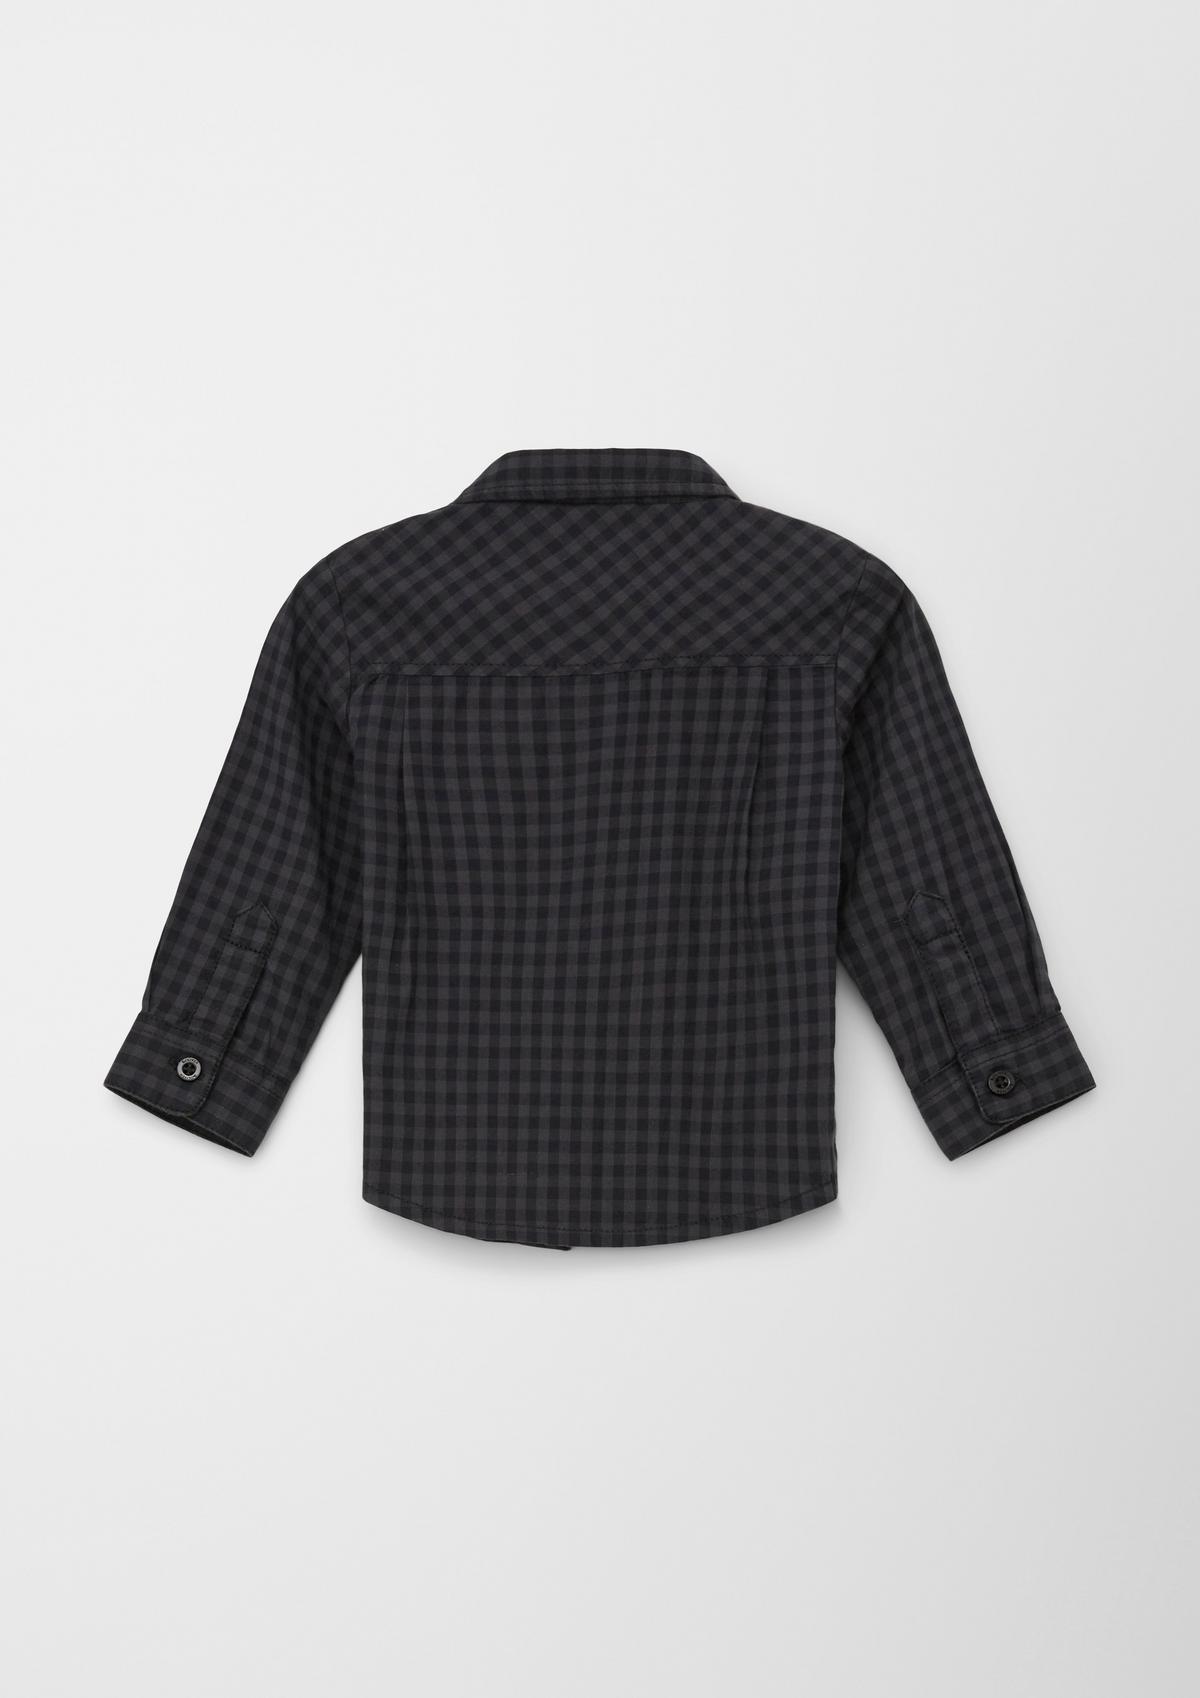 s.Oliver Long sleeve shirt with a detachable bow tie